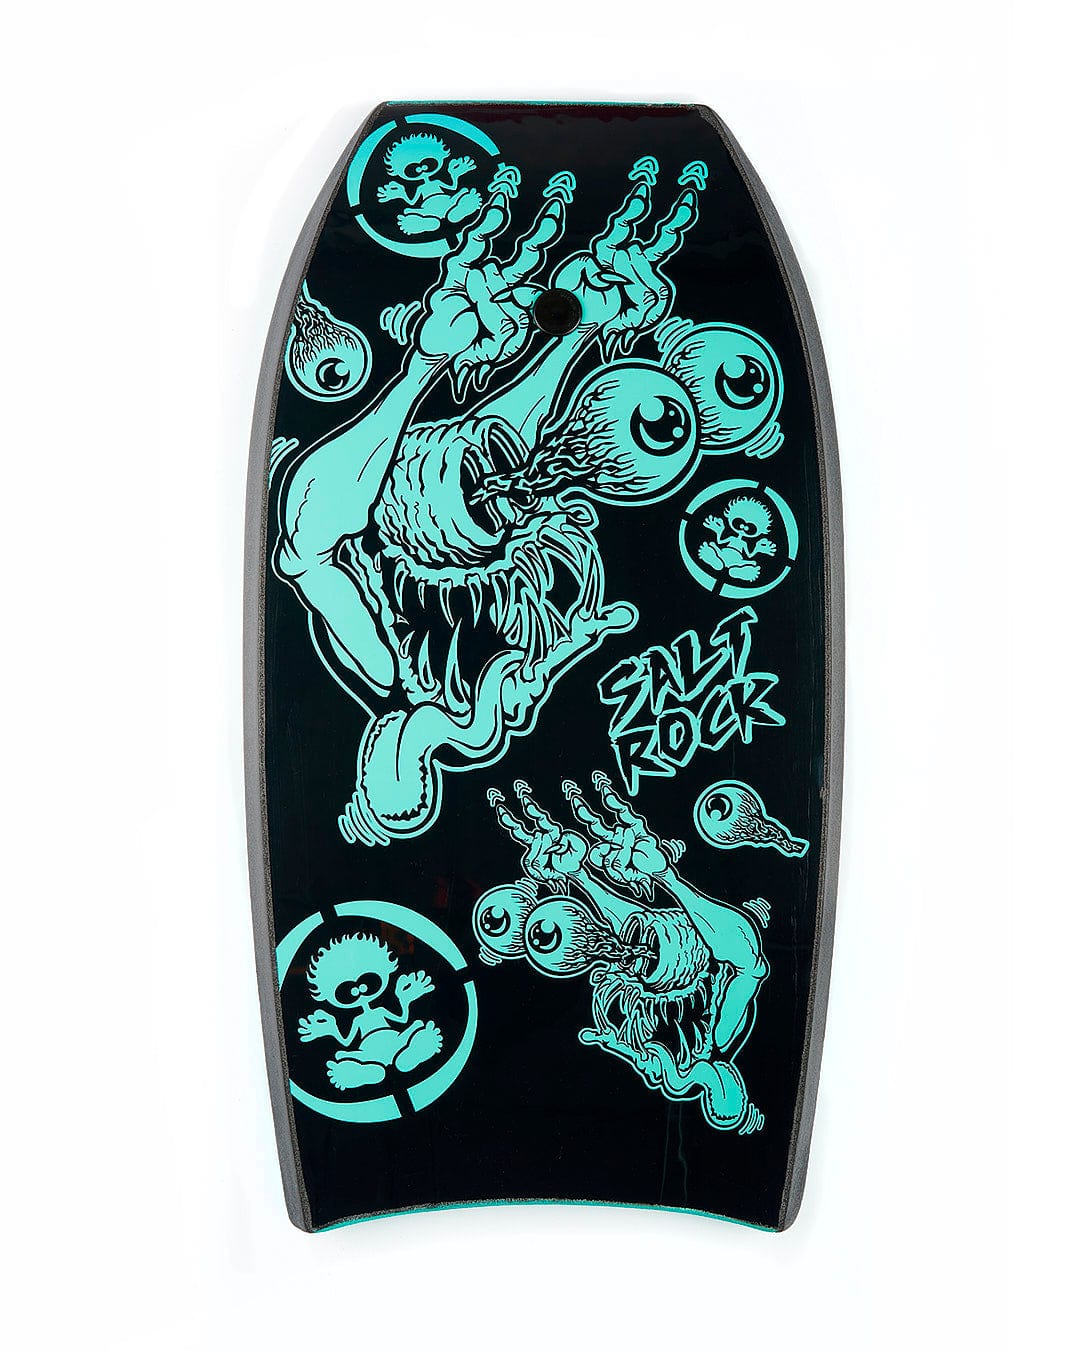 A Saltrock Creeper 37" Bodyboard - Turquoise with a skull design on it.